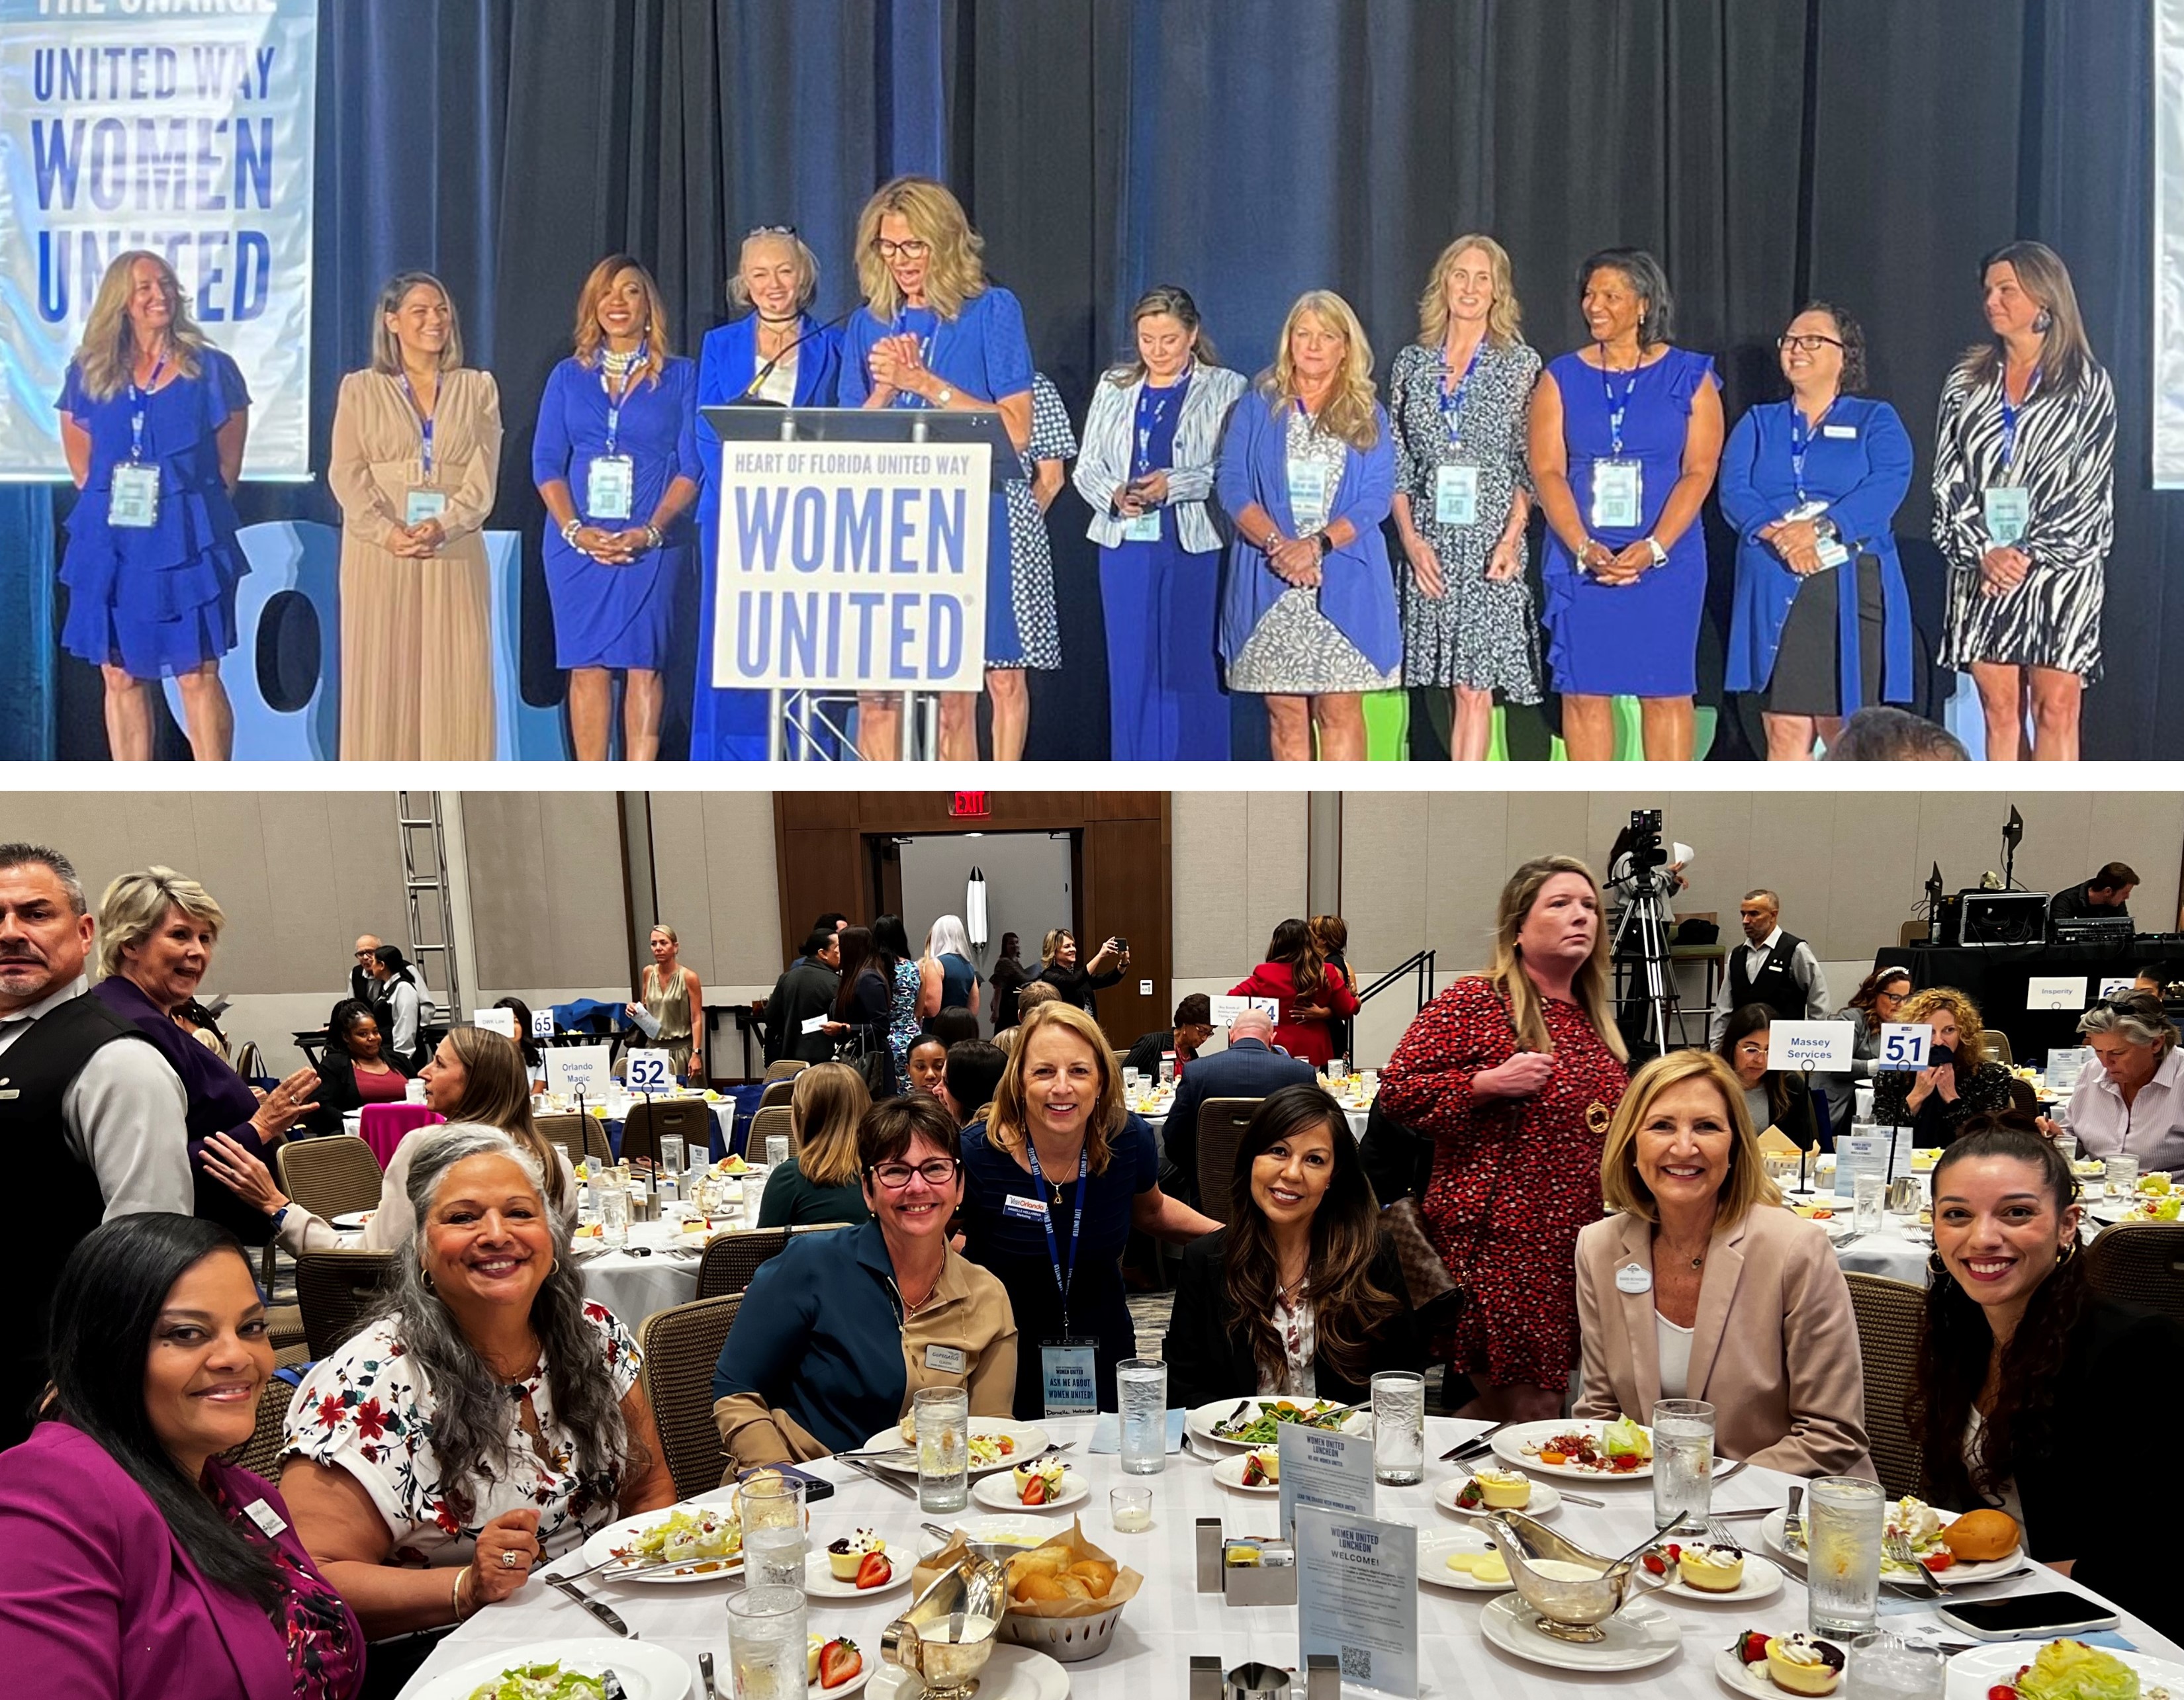 Visit Orlando board members Barb Bowden, Claudia Menezes, Diana Font and Evelyn Cardenas; Visit Orlando team members Danielle Hollander, Destiny Vega and Kristin Westover; and Deborah Bowie representing the onePULSE Foundation, attends the Women United Luncheon. 